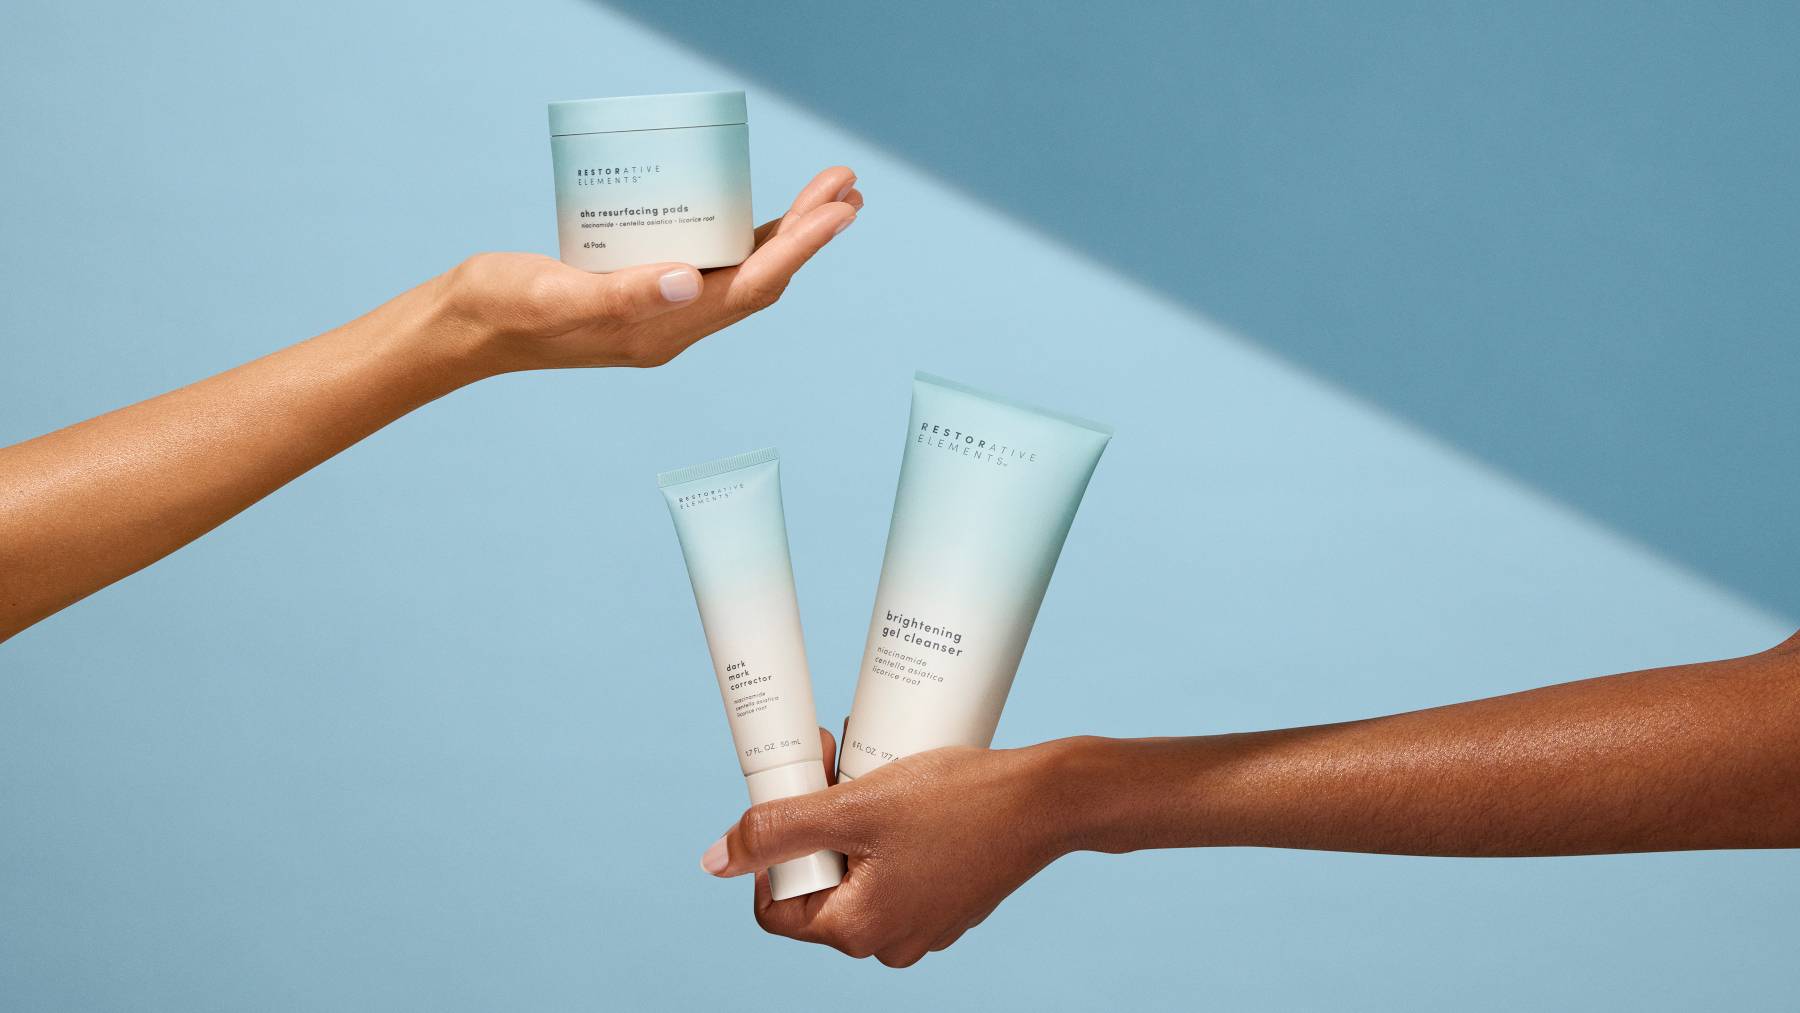 Restorative Elements, one of Alchemee's new brands, sells products meant to target skin discolouration.